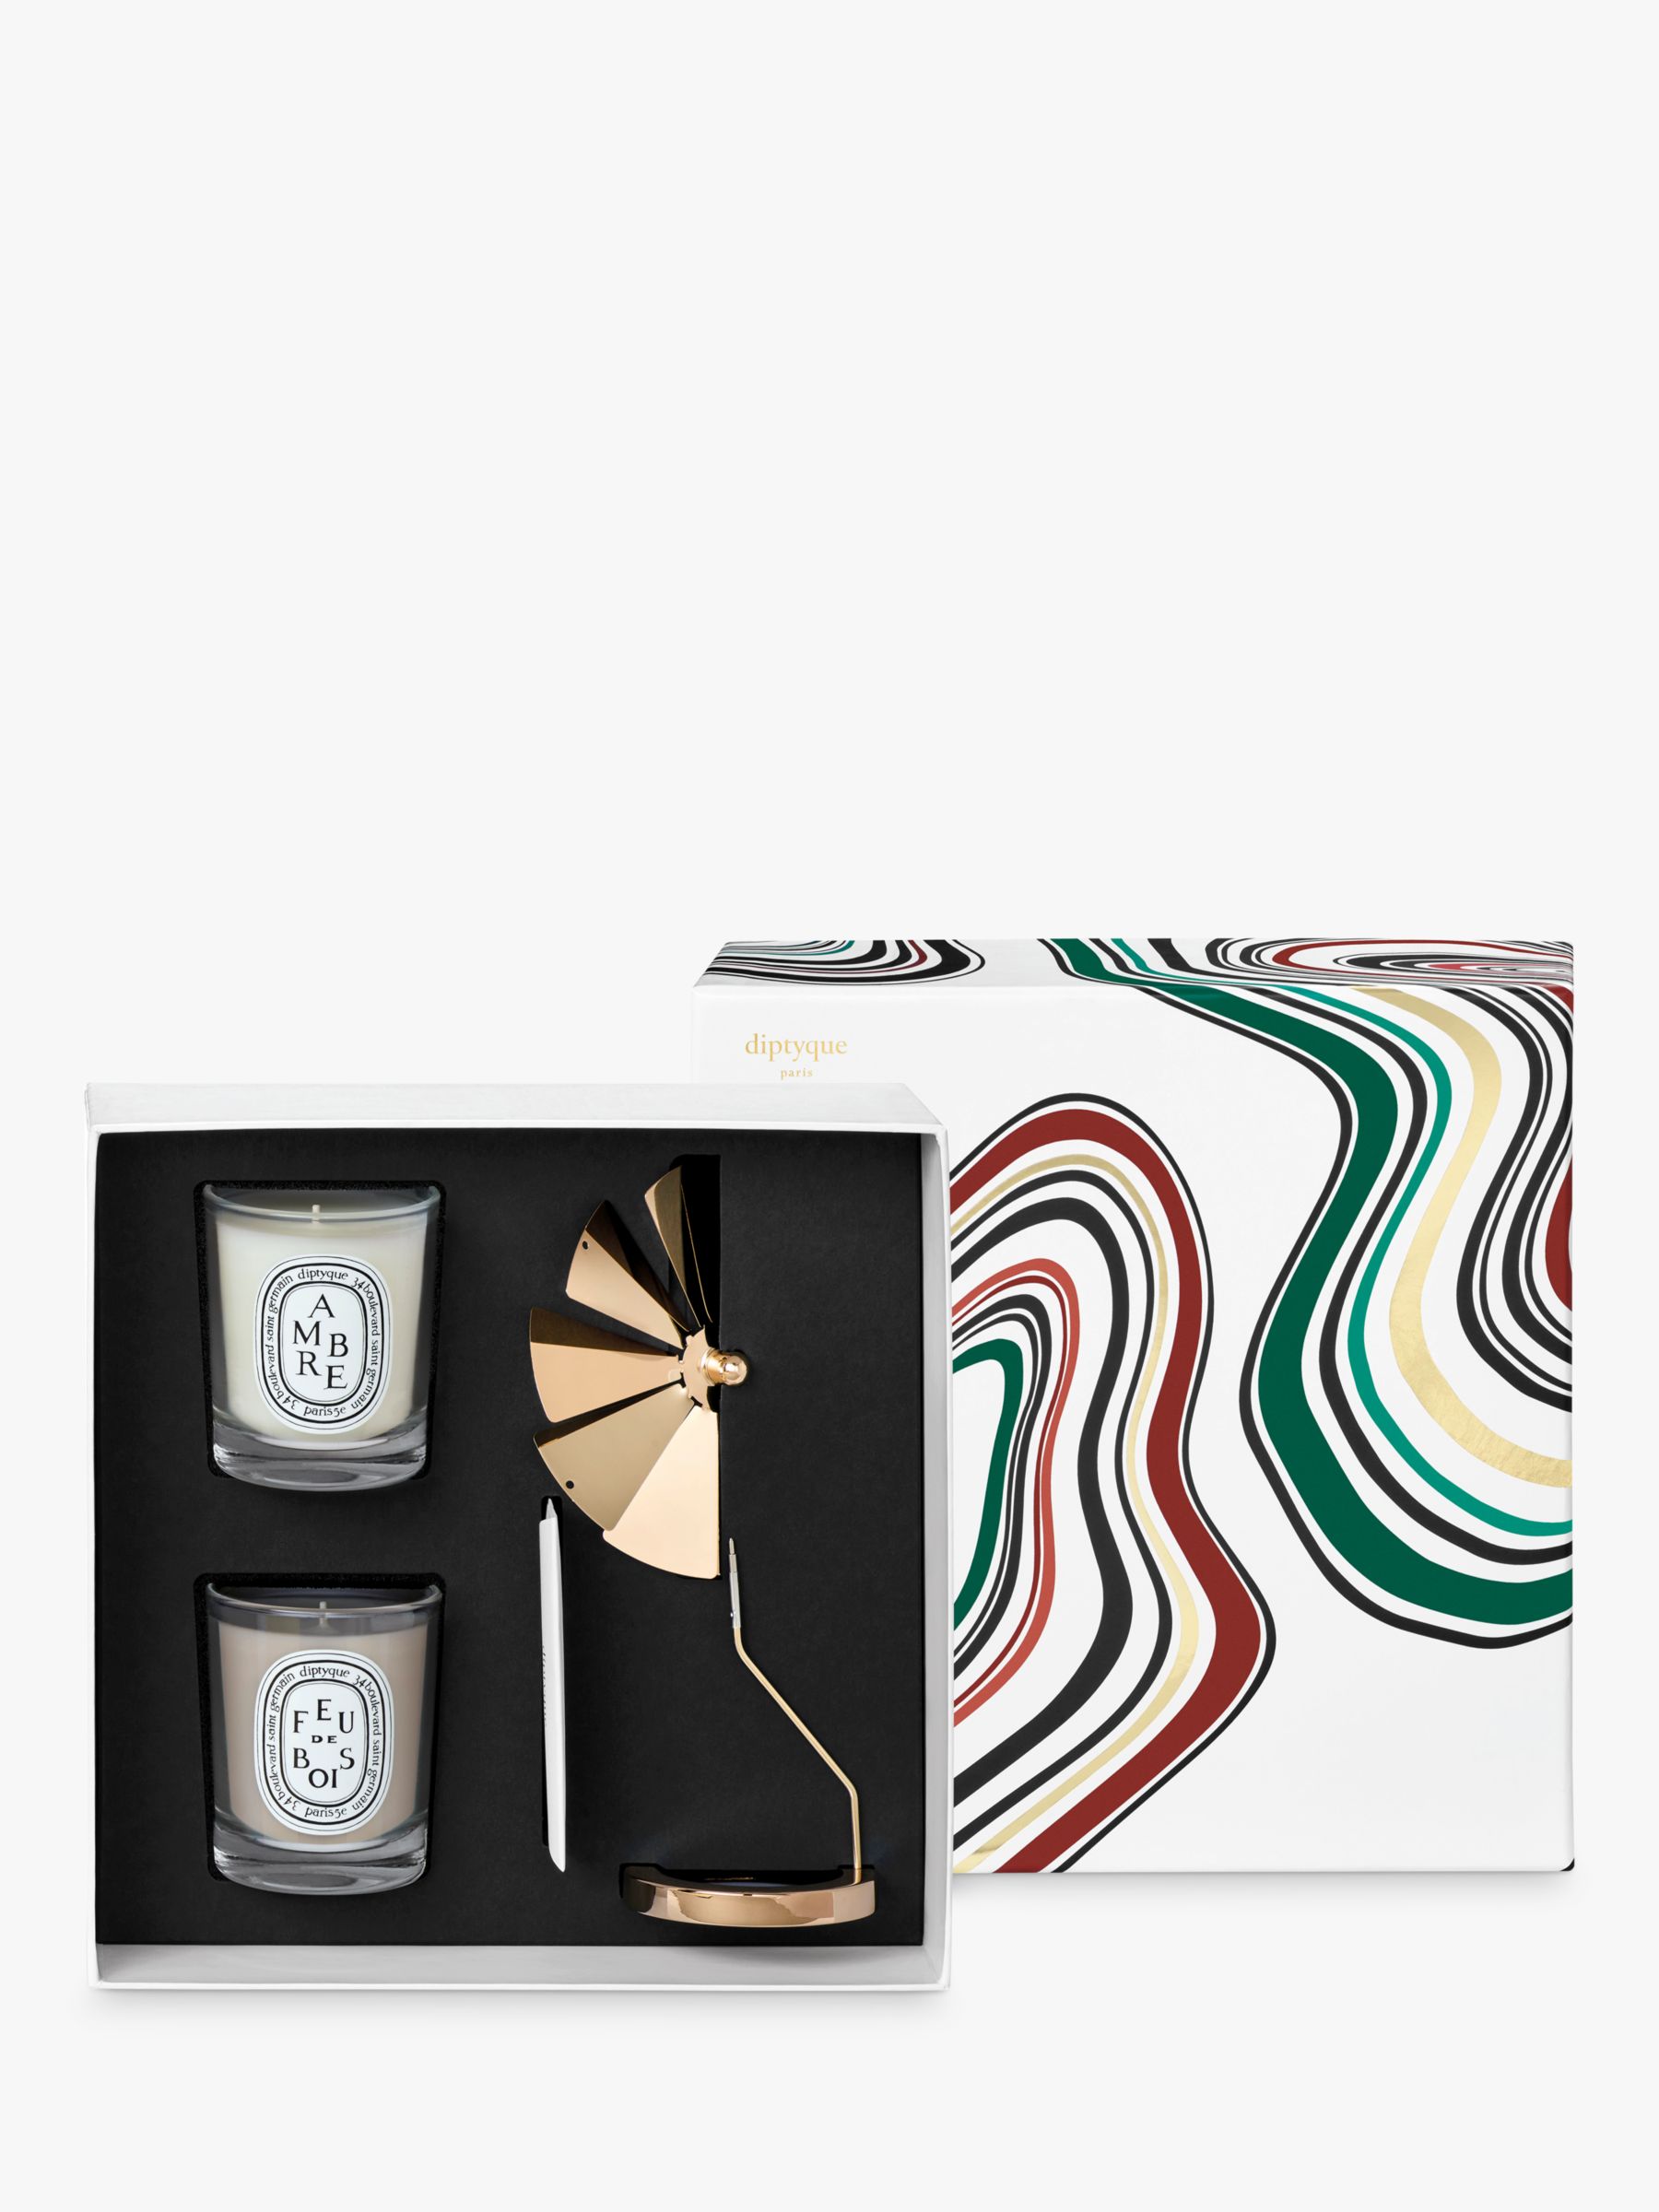 Diptyque Carousel and Candle Gift Set, 2 x 70g